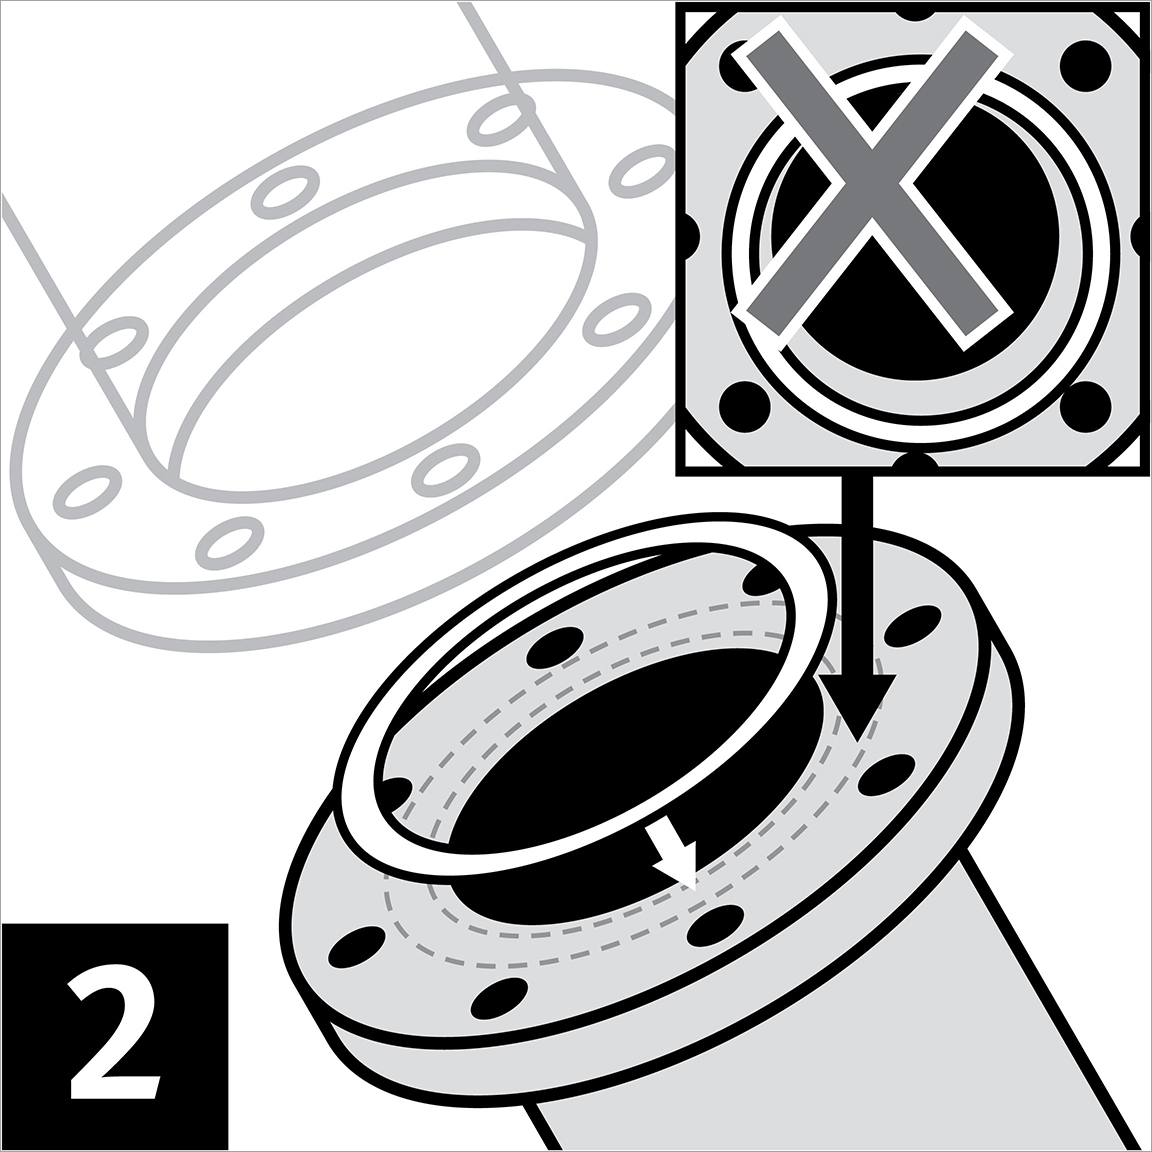 Position the gasket so that it is centered on the flange.